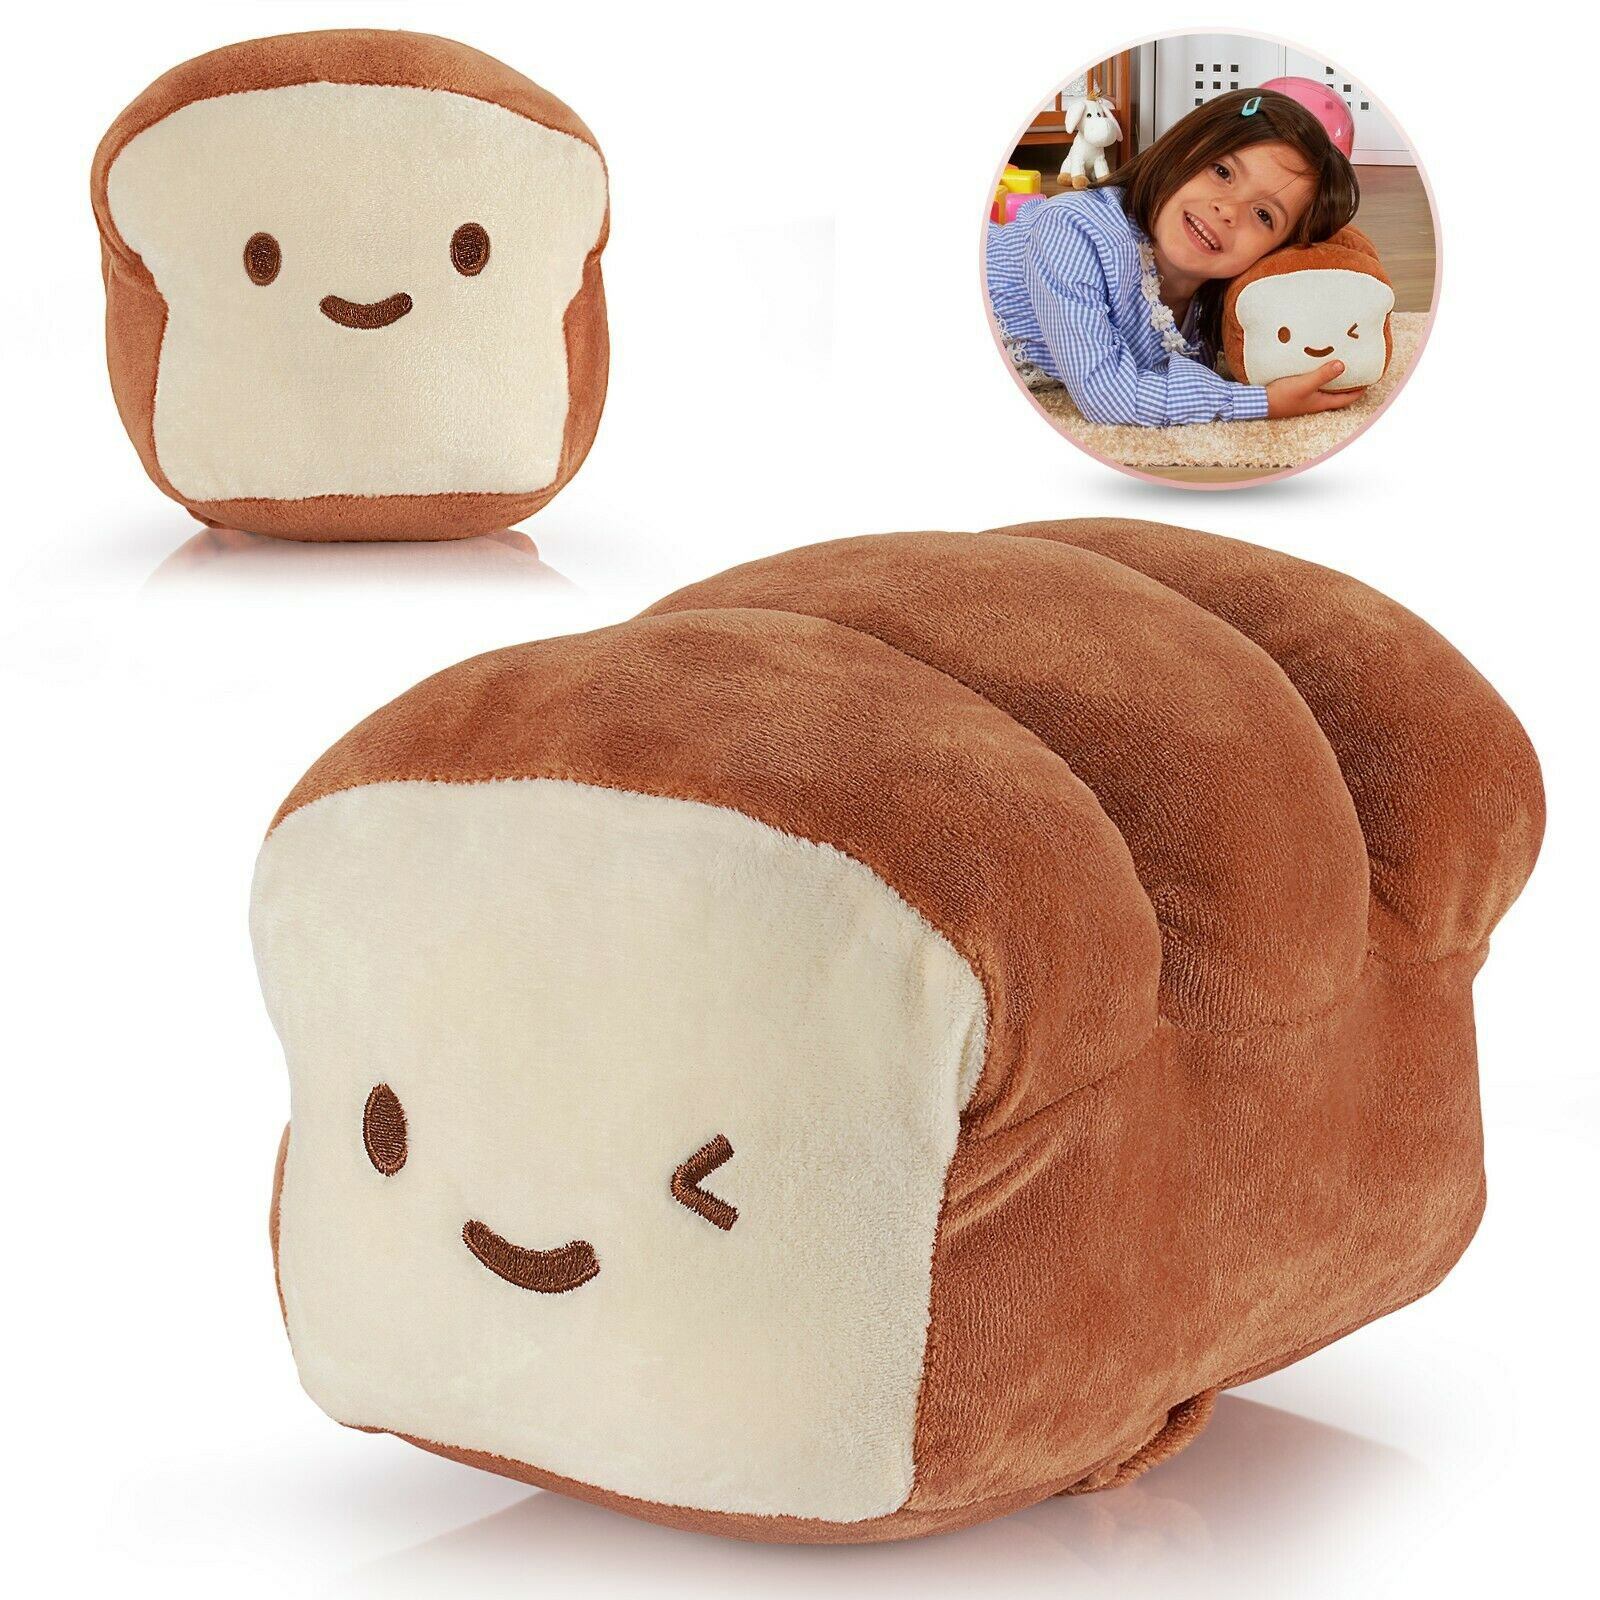 Bread Plush Pillow Cushion Doll Cotton Food Decoration for Home Interior and Kids